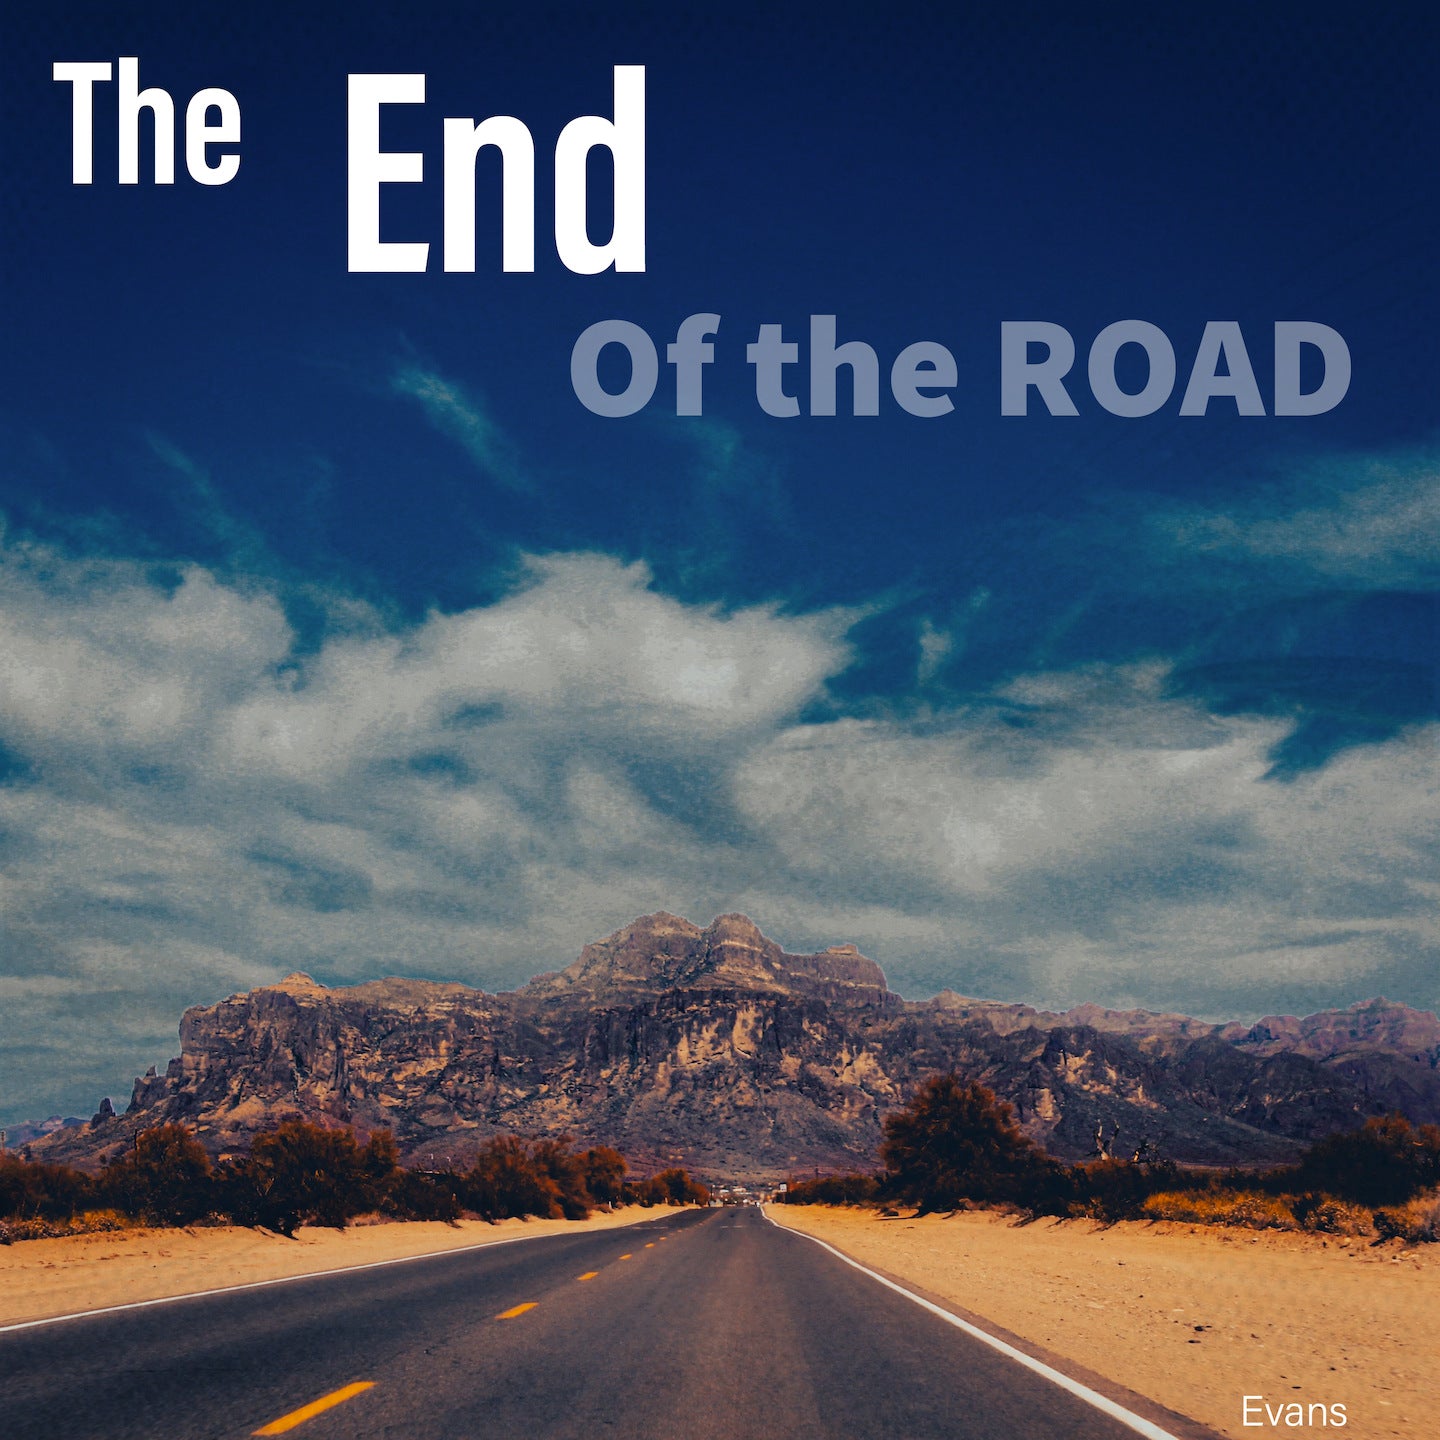 The End of The Road